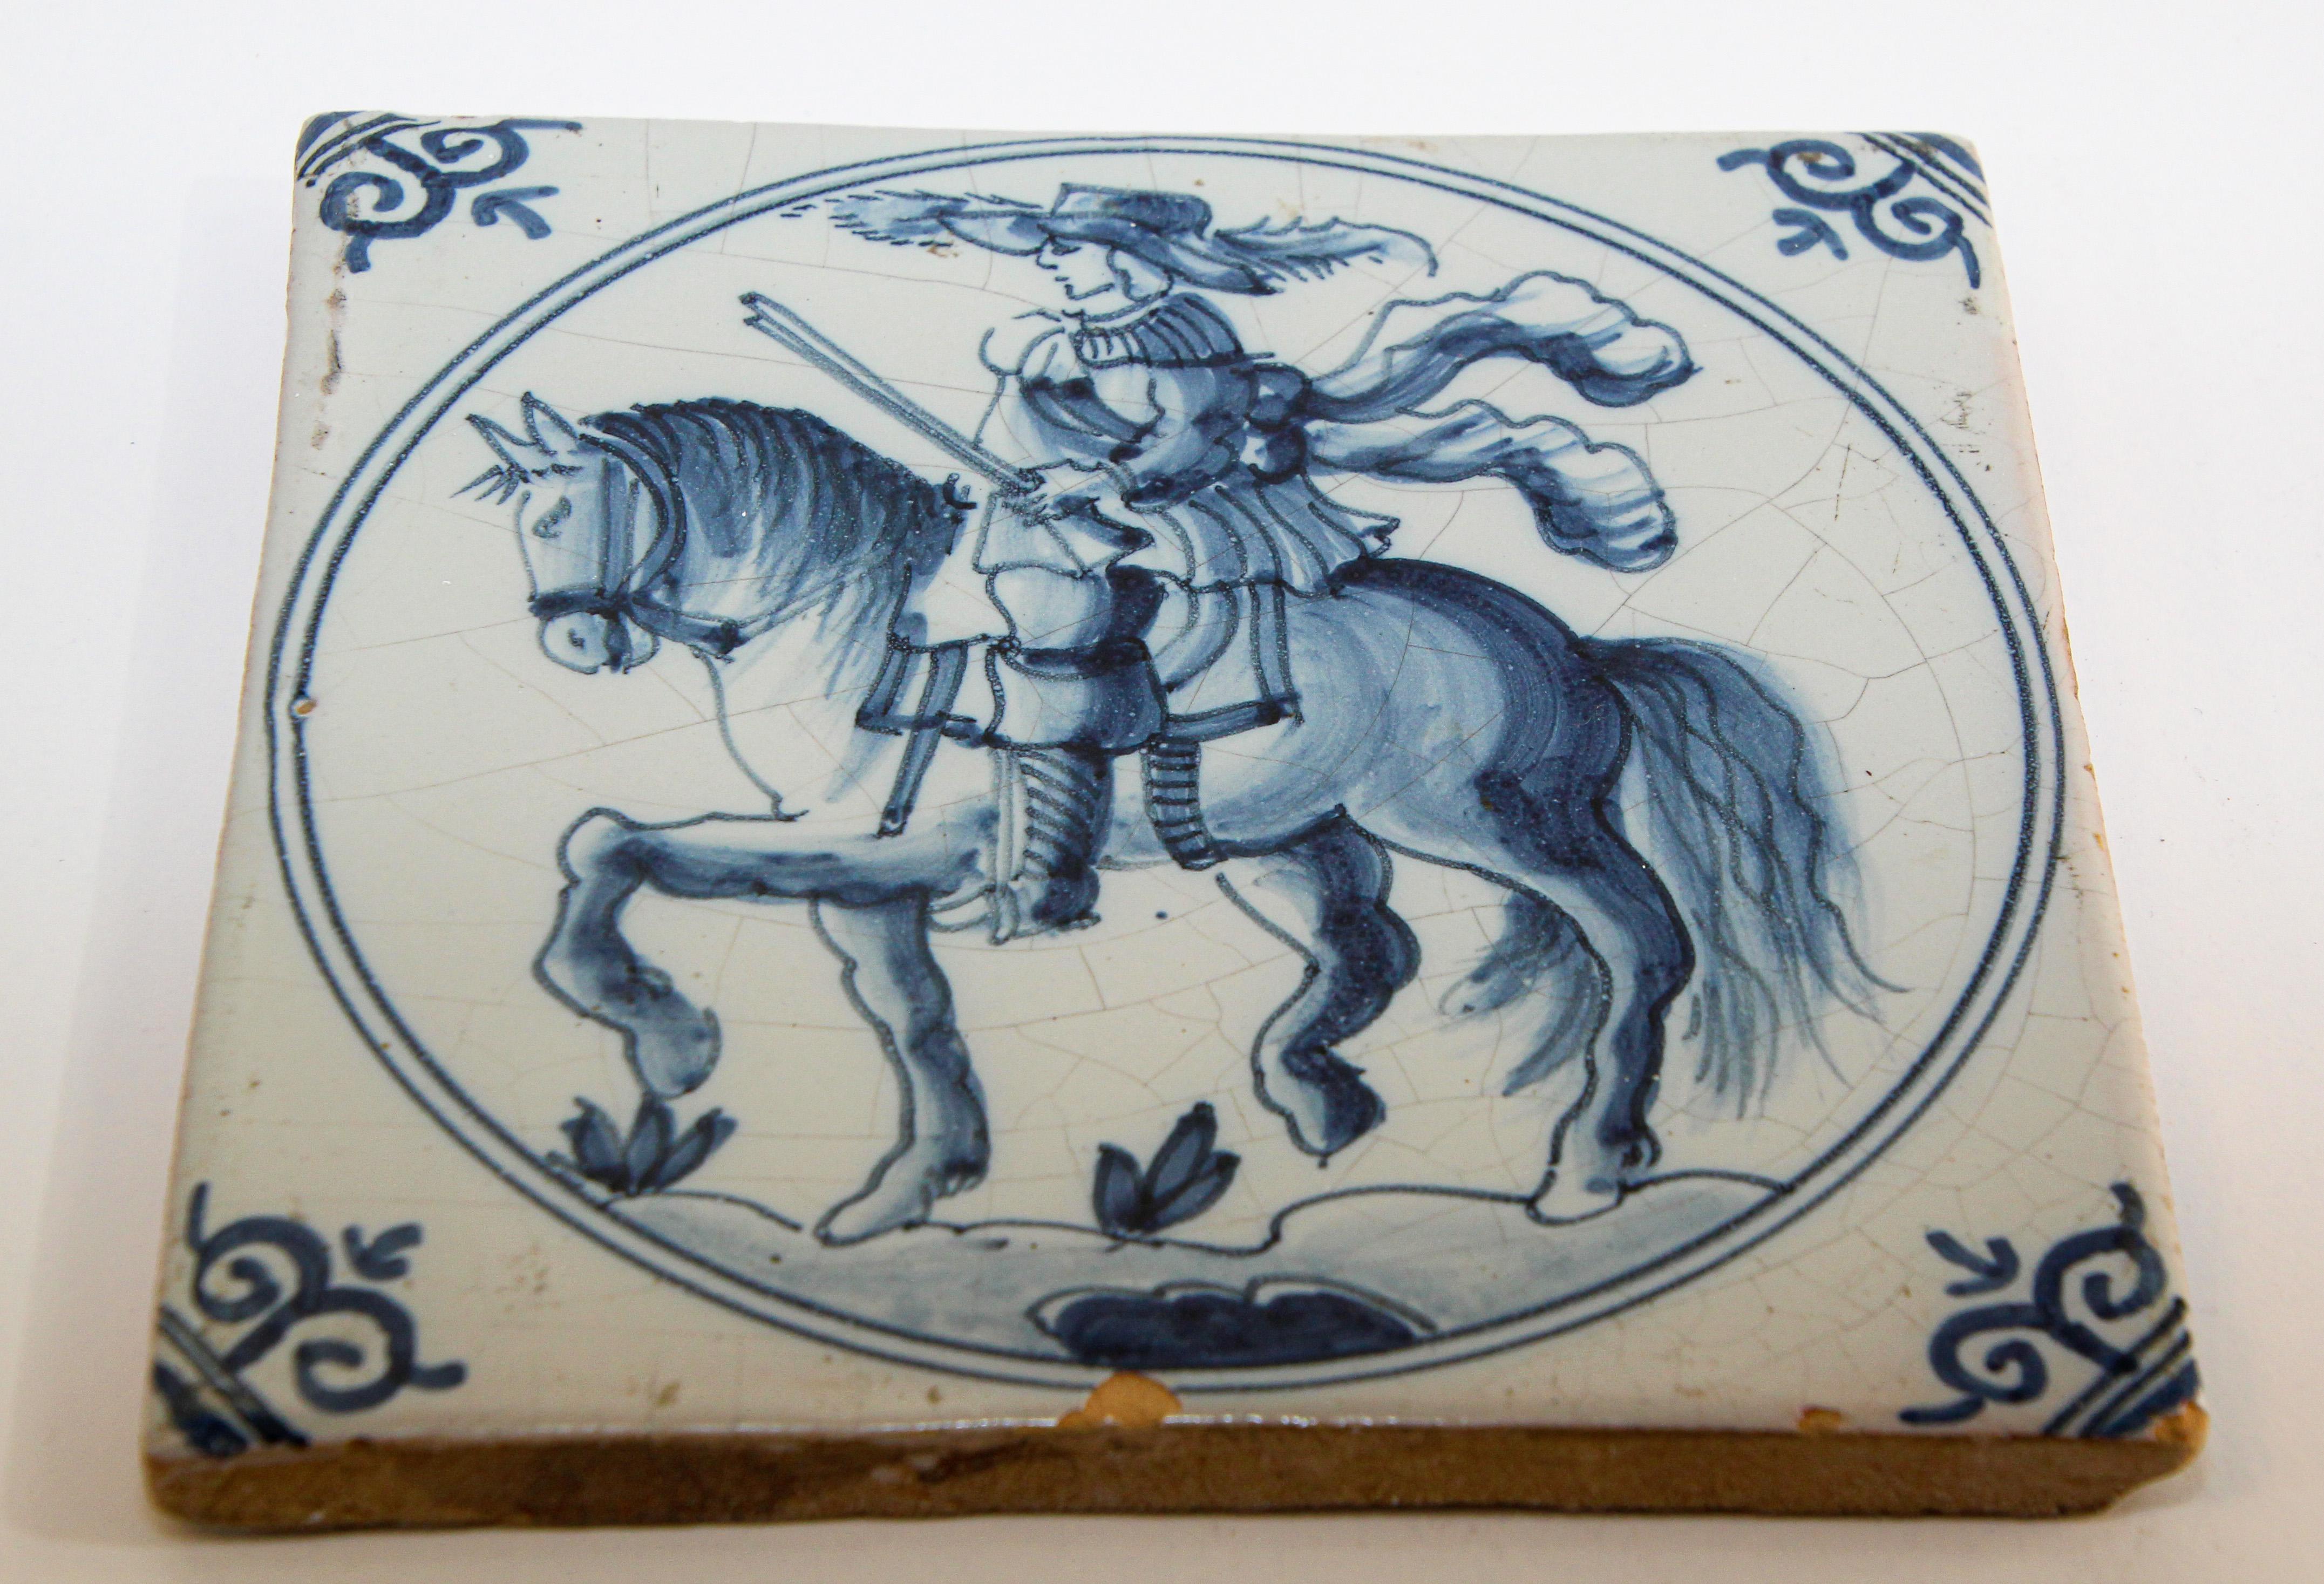 Delft Ceramic Decorative Tile Featuring a Man on Horse For Sale 6